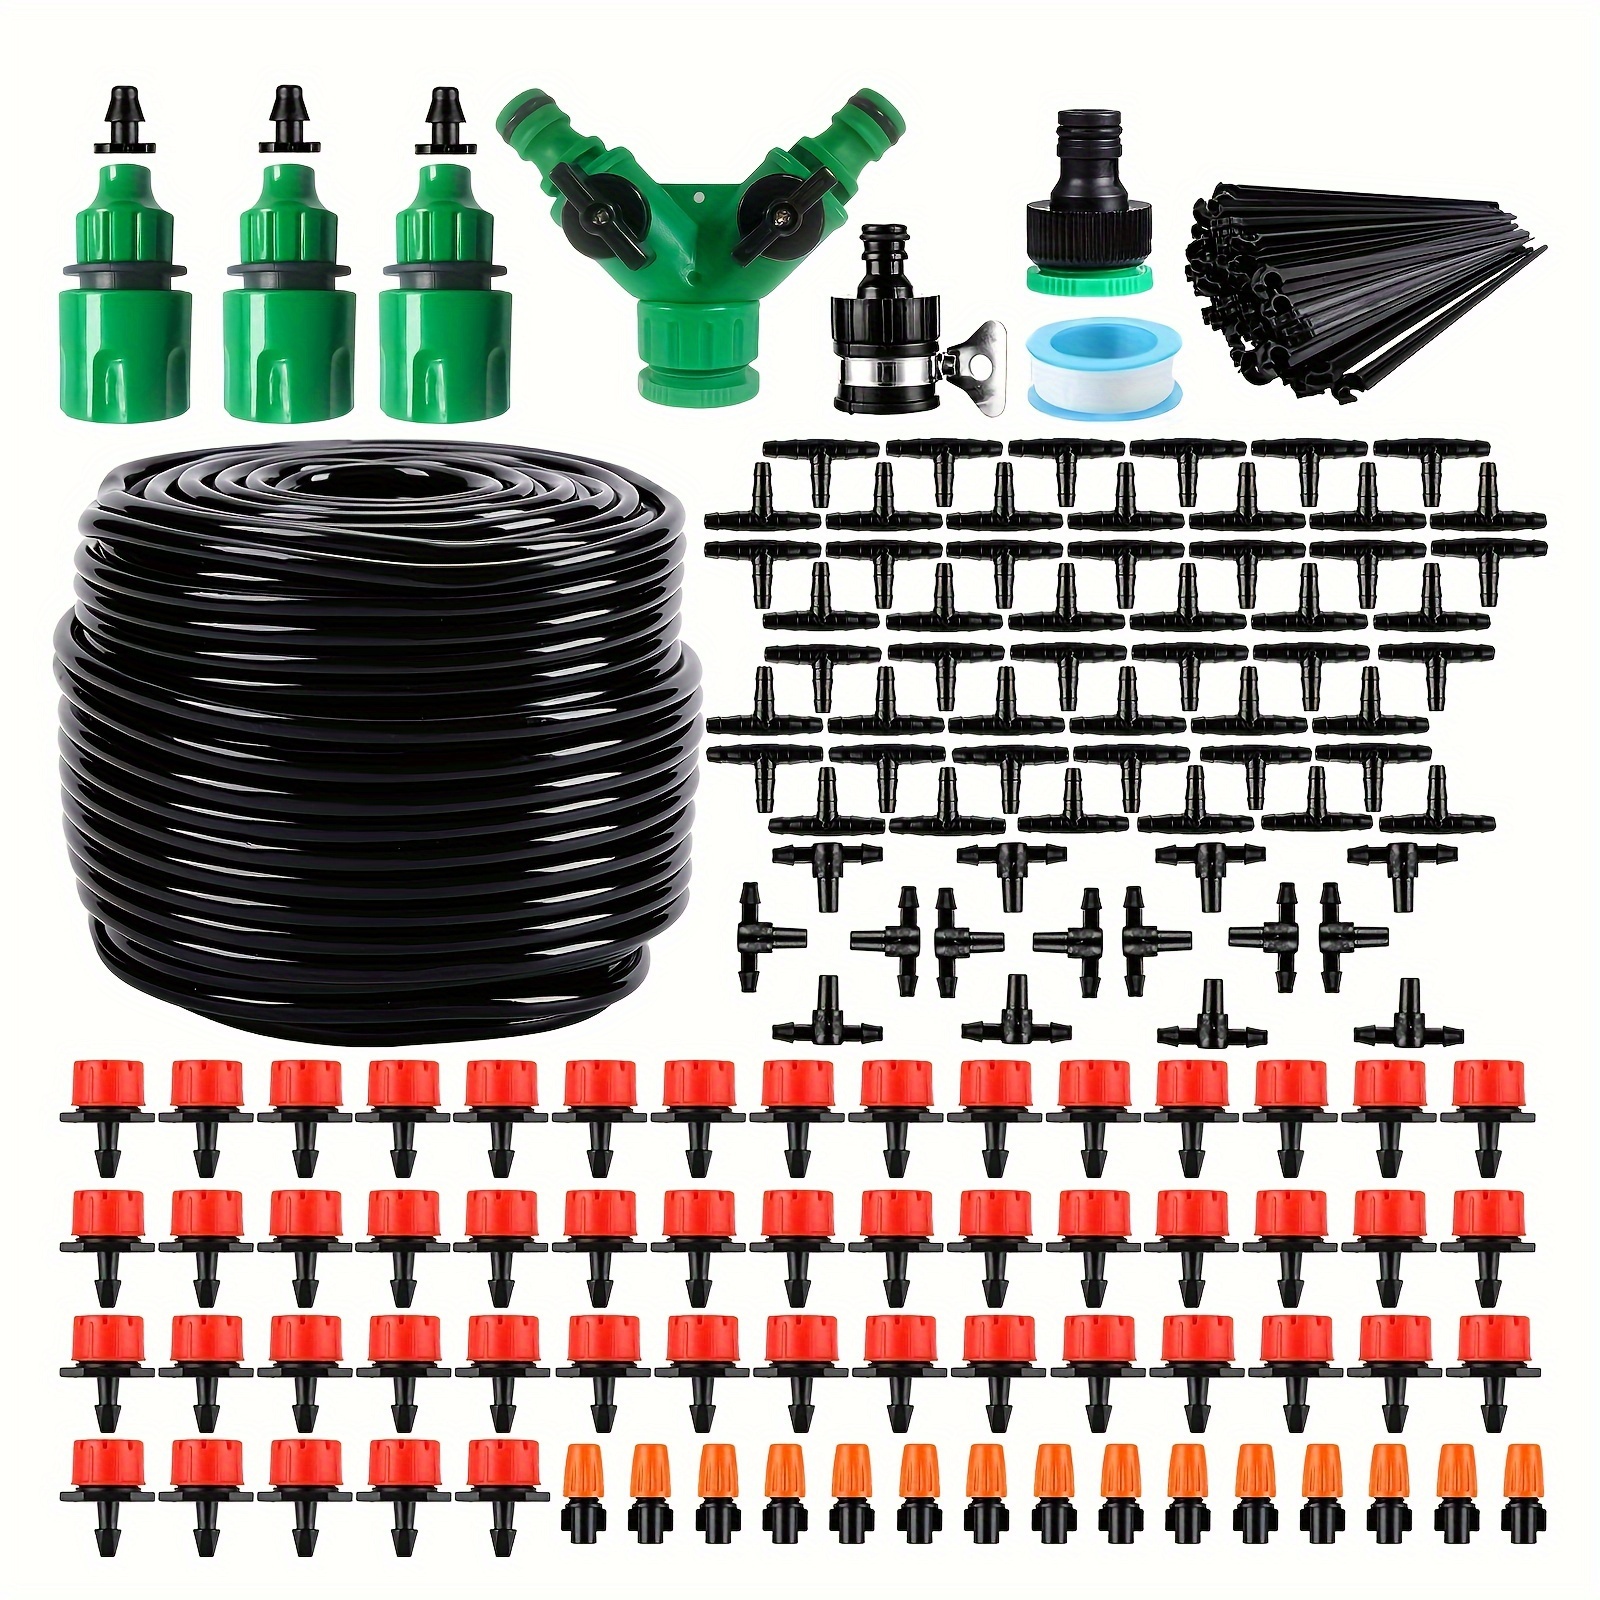 

Adjustable Drip Garden Irrigation System - Diy Automatic Watering, Water-efficient, Universal Connector Hose Kit